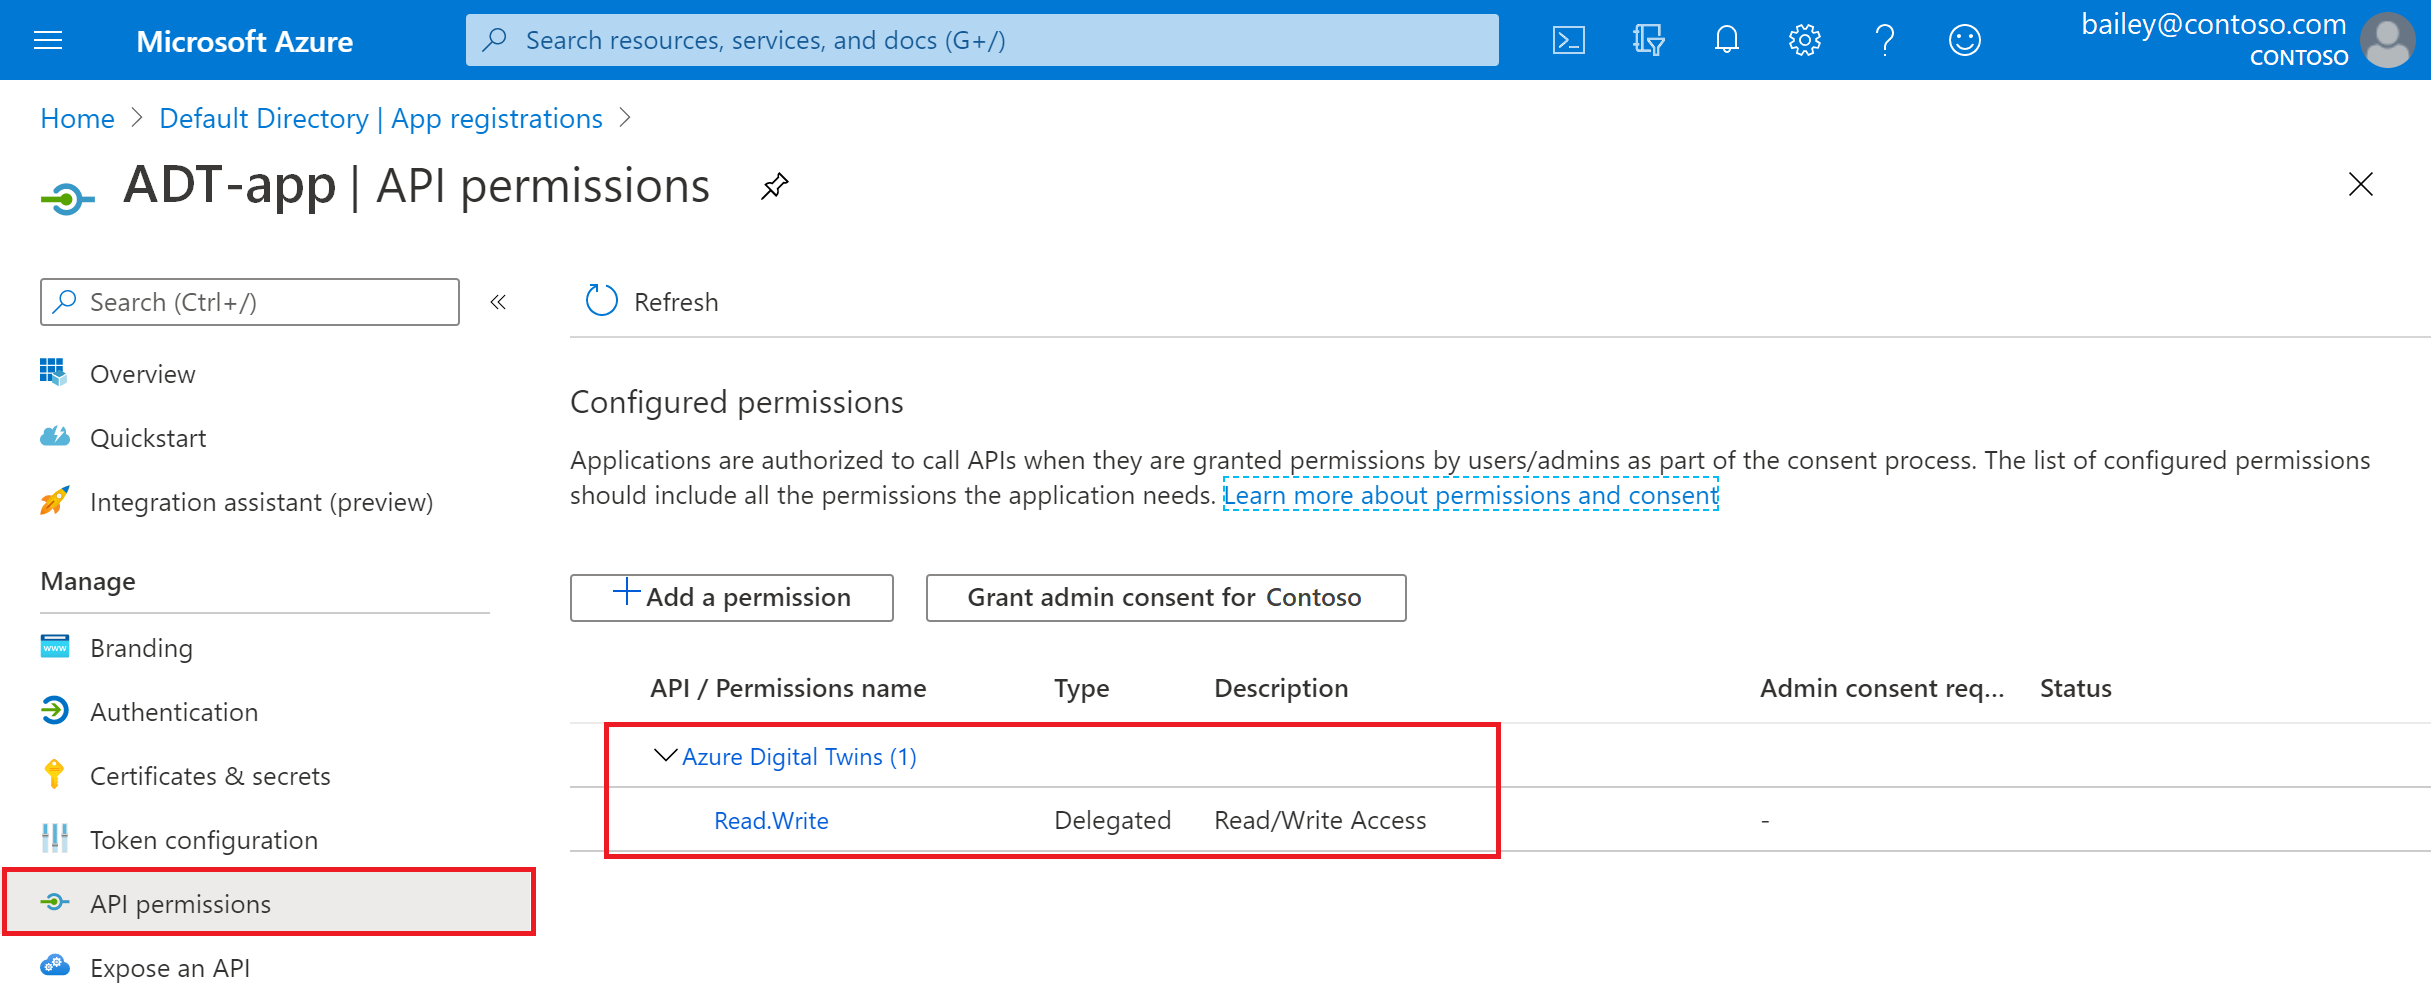 Screenshot of the API permissions for the Azure AD app registration in the Azure portal, showing 'Read/Write Access' for Azure Digital Twins.